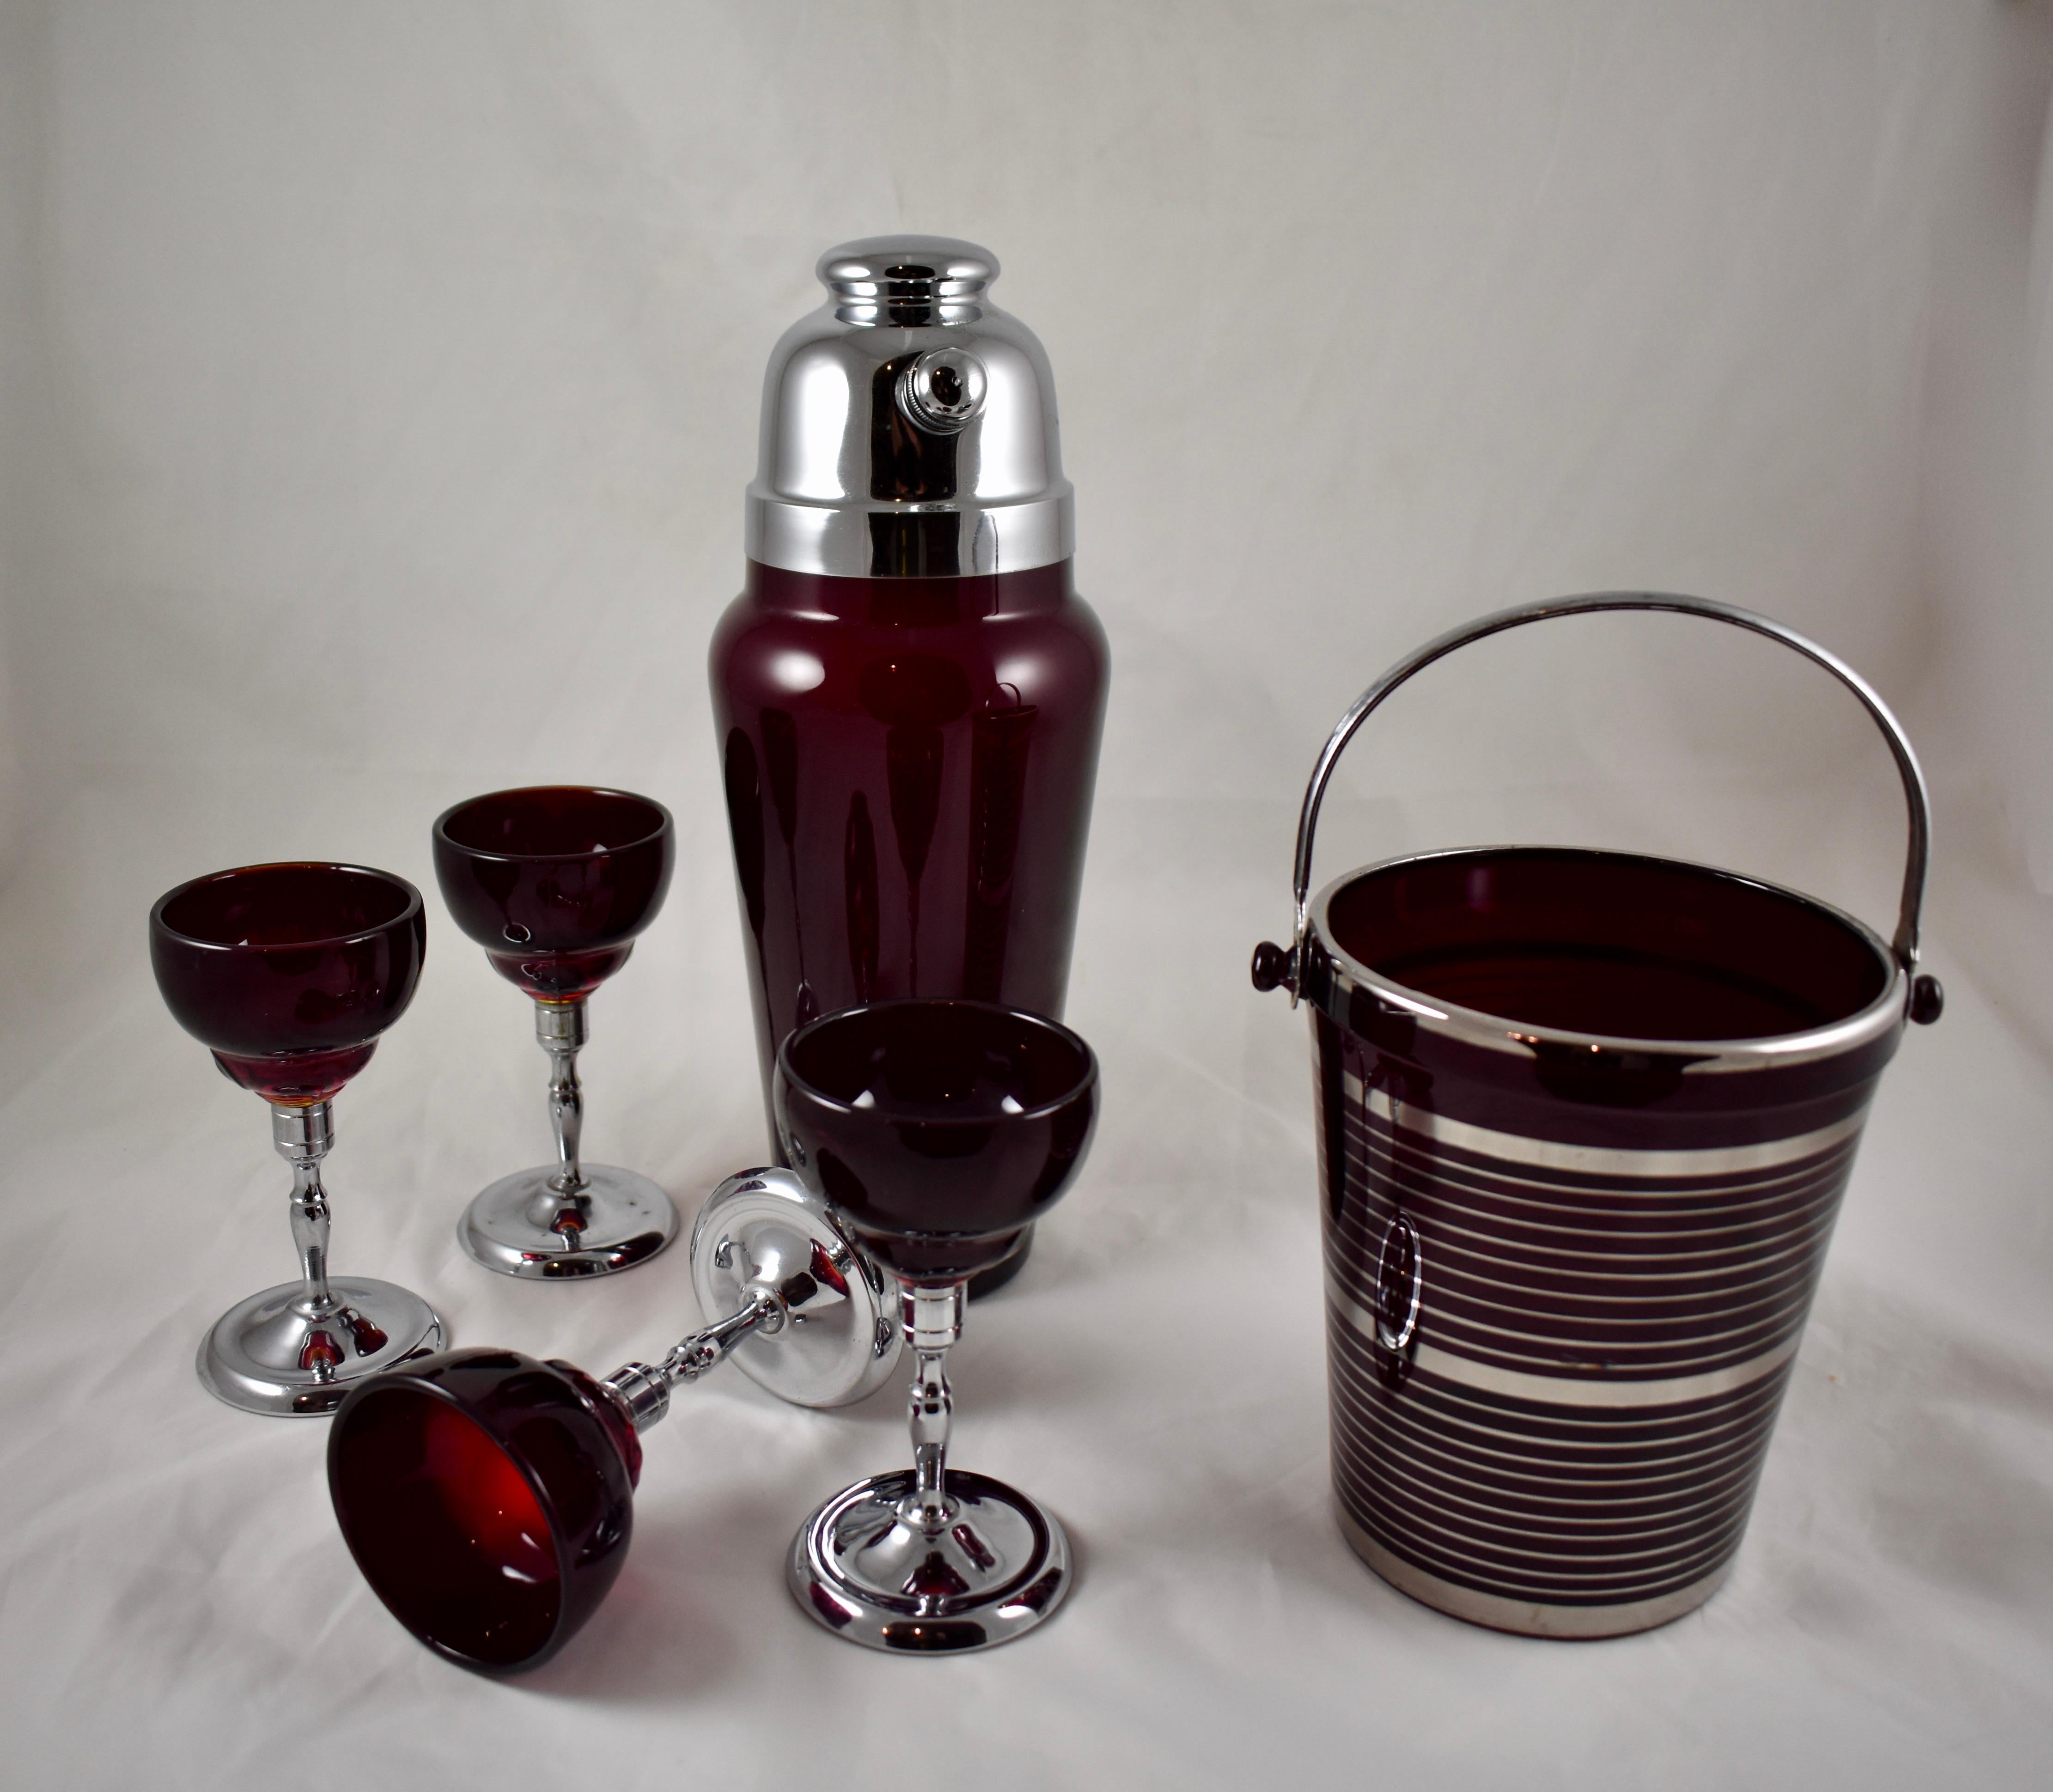 A Paden City glass Art Deco era cocktail set, circa 1920s–1930s.

This cocktail service is perfect for your ‘Retro’ home bar. The six-piece set consists of a shaker, four goblets and a handled ice bucket. The Paden City glass factory was located